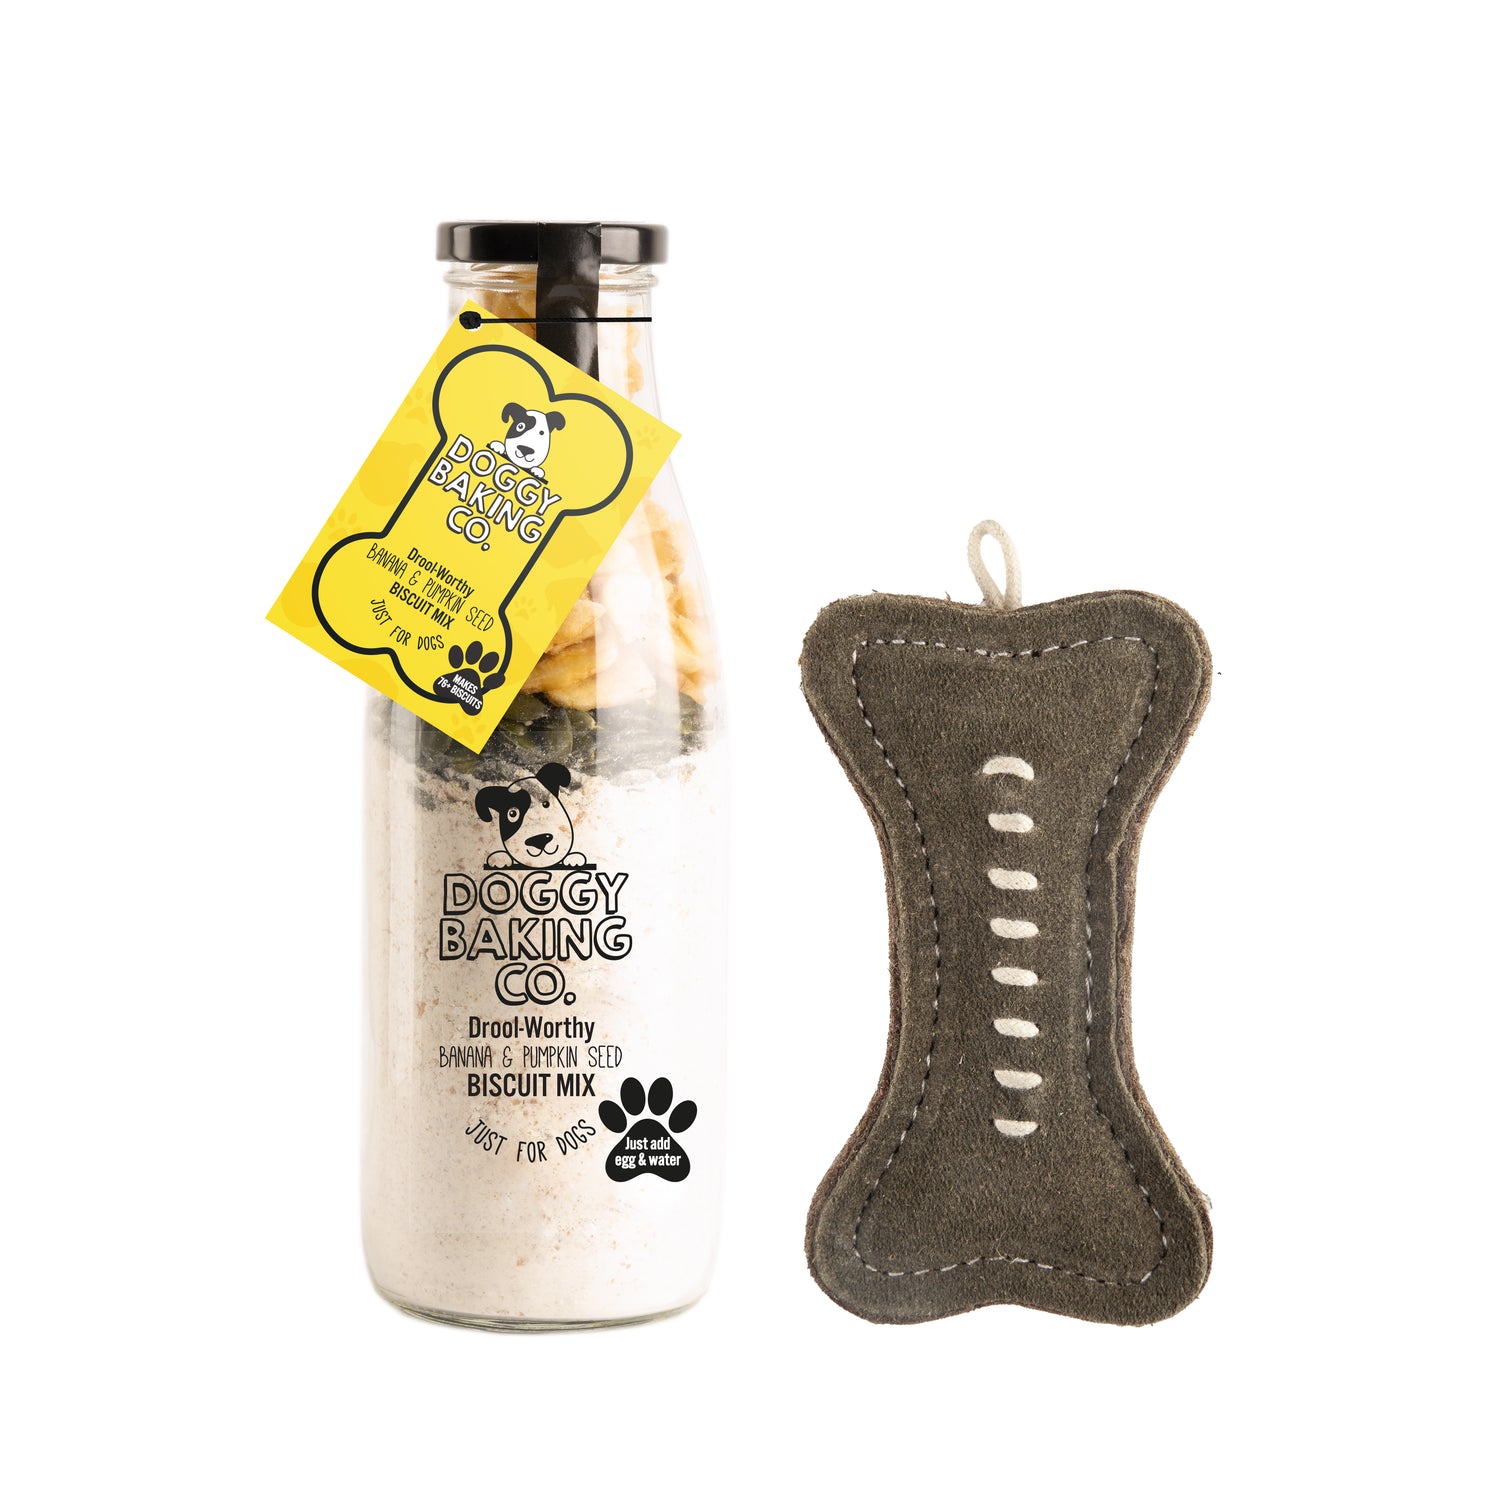 Pumpkin Seed & Banana Biscuit Mix & Green Bone Eco Toy Bundle - Doggy Baking Co by The Bottled Baking Co